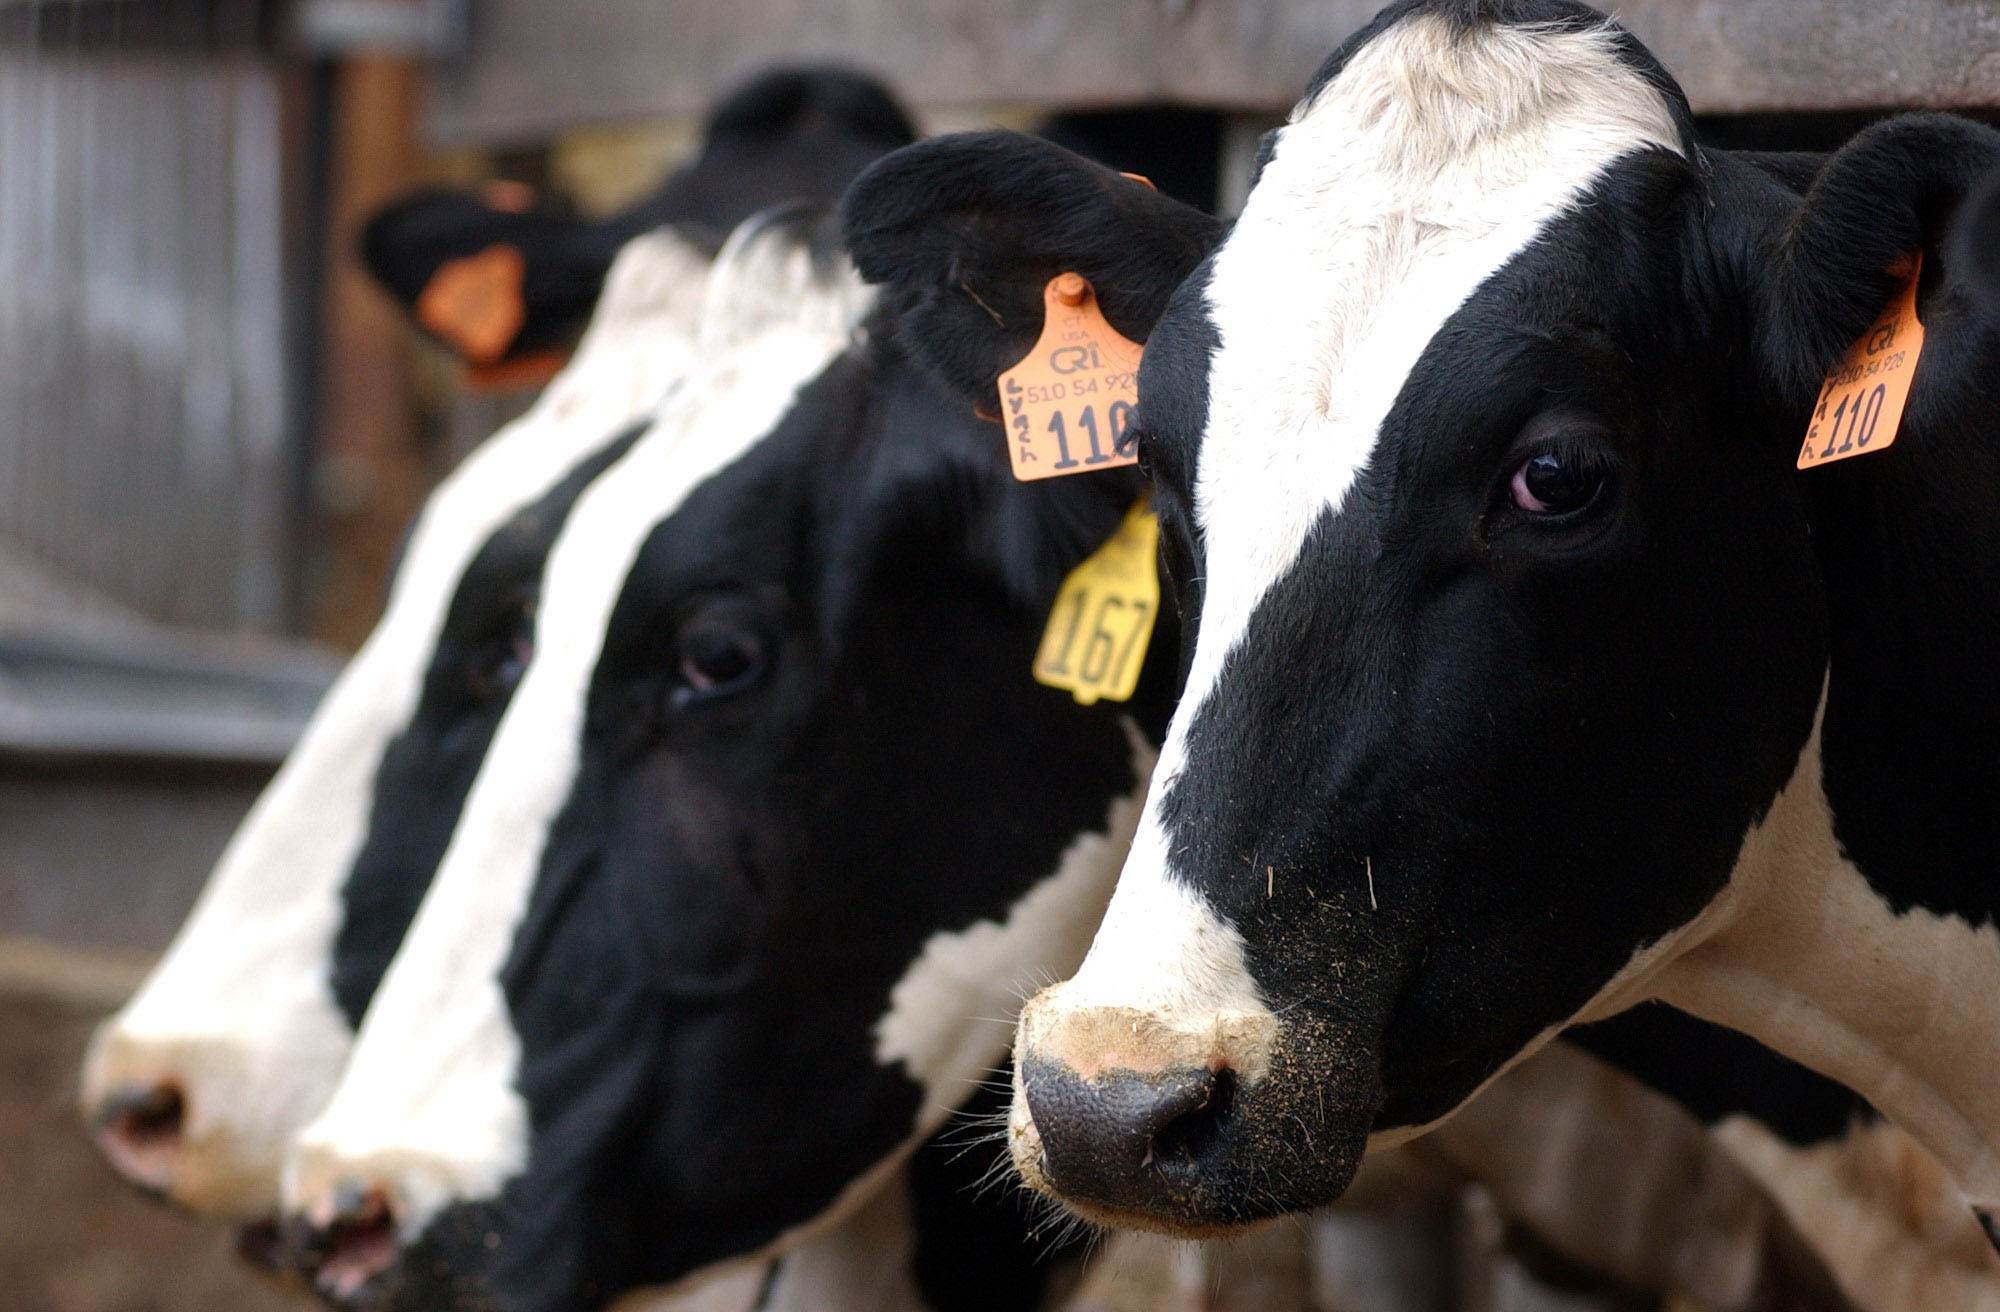 Kewaunee County dairy CAFO sues DNR over permit barring future expansion